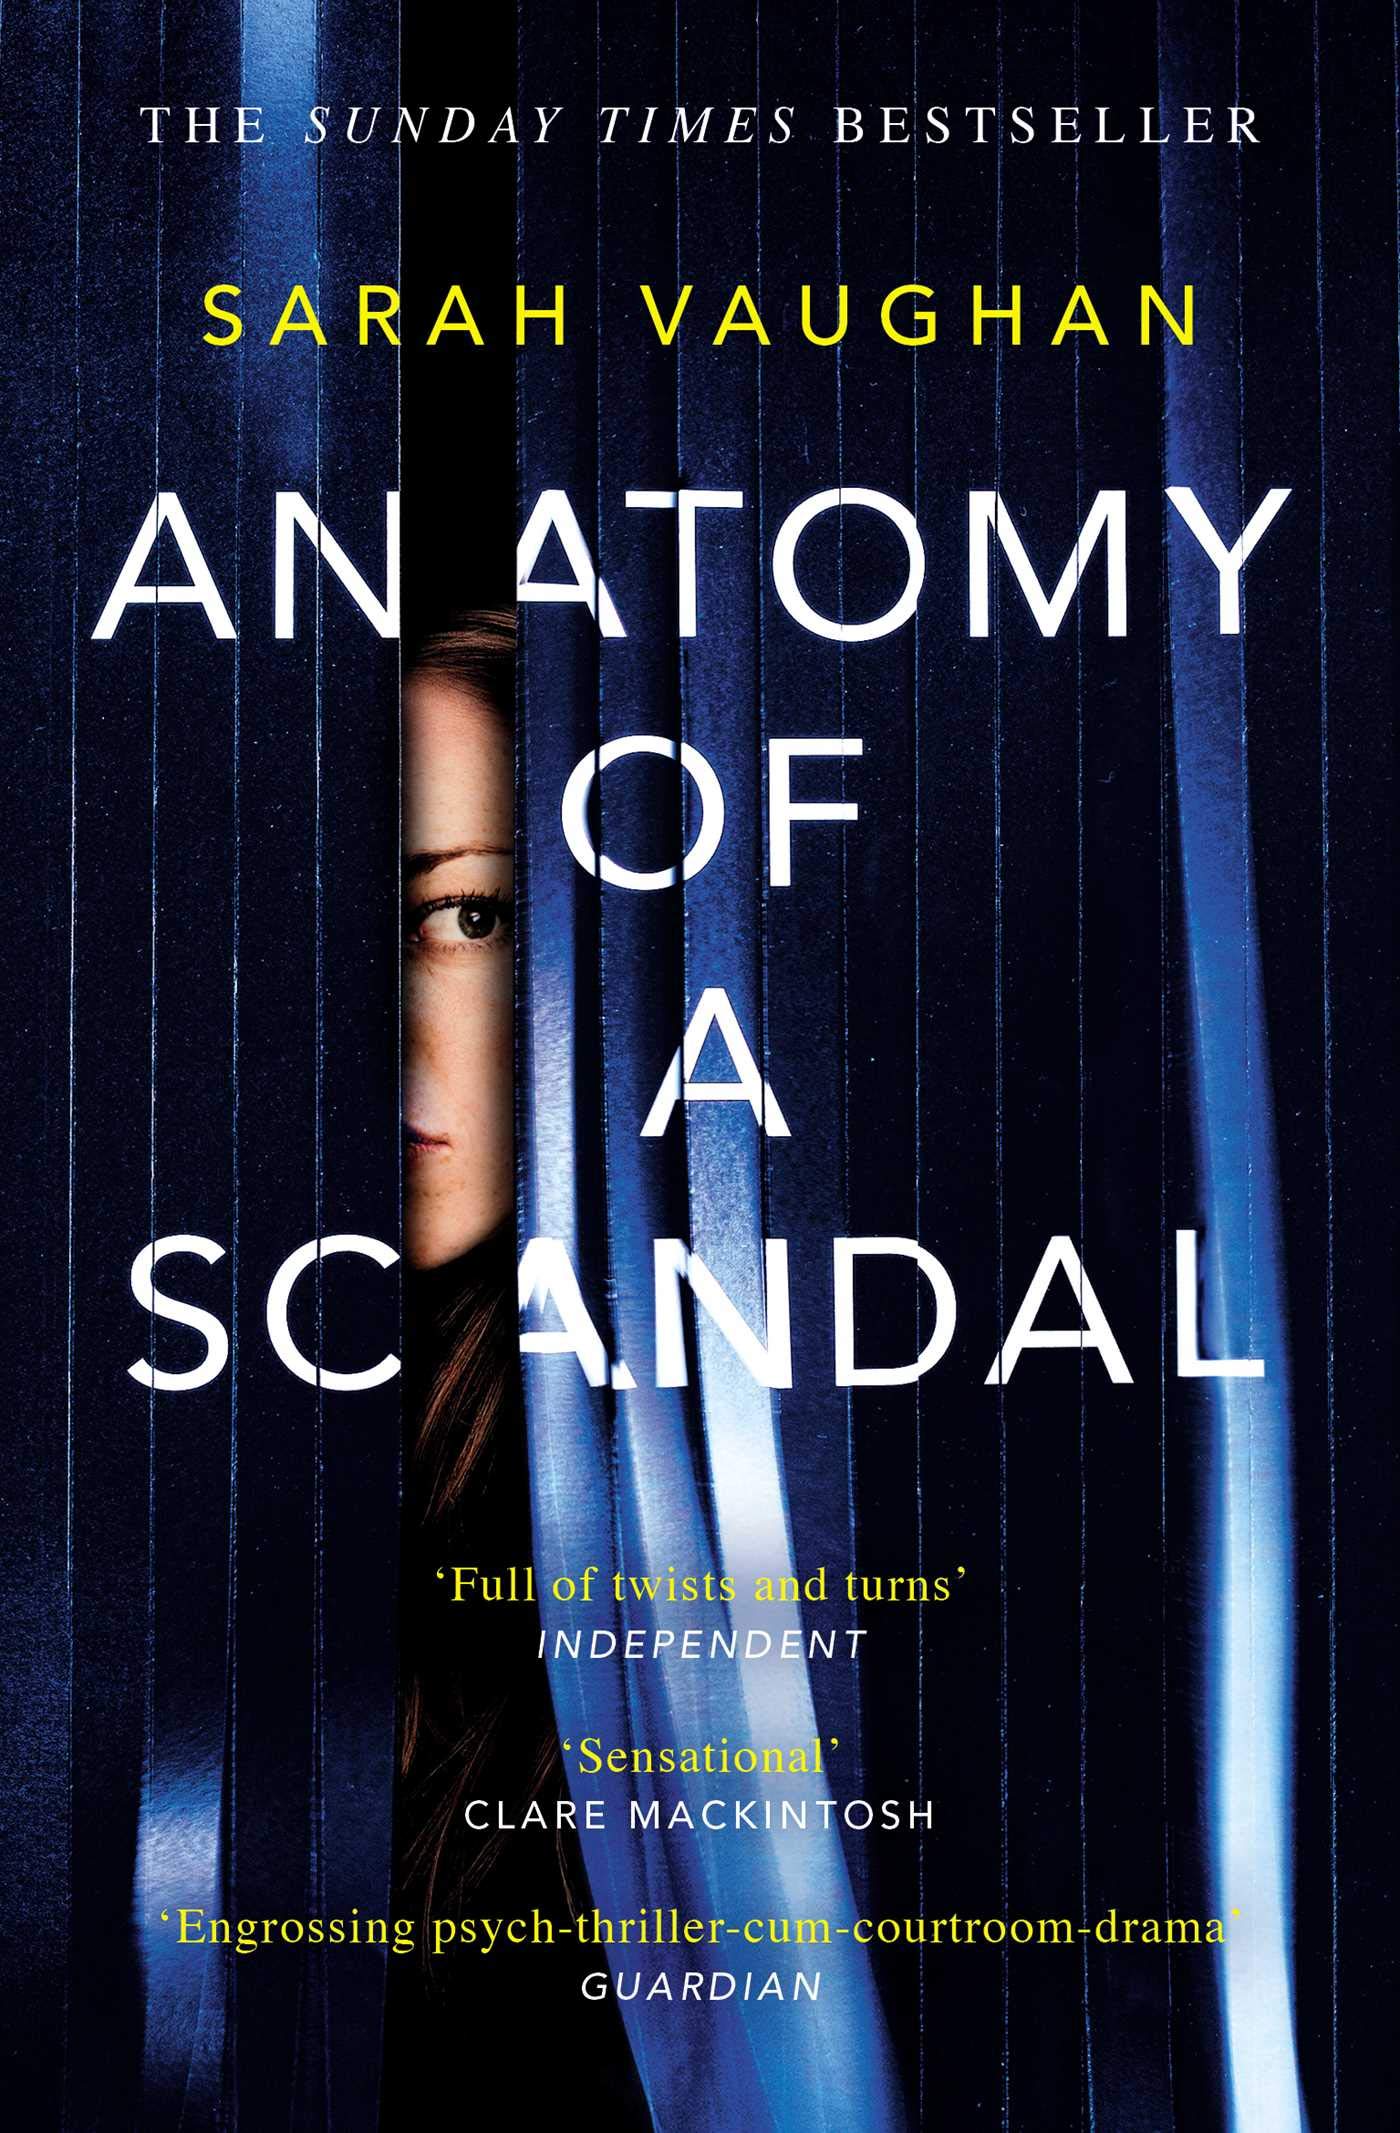 Anatomy of a Scandal: The Sunday Times Bestseller Everyone is Talking about